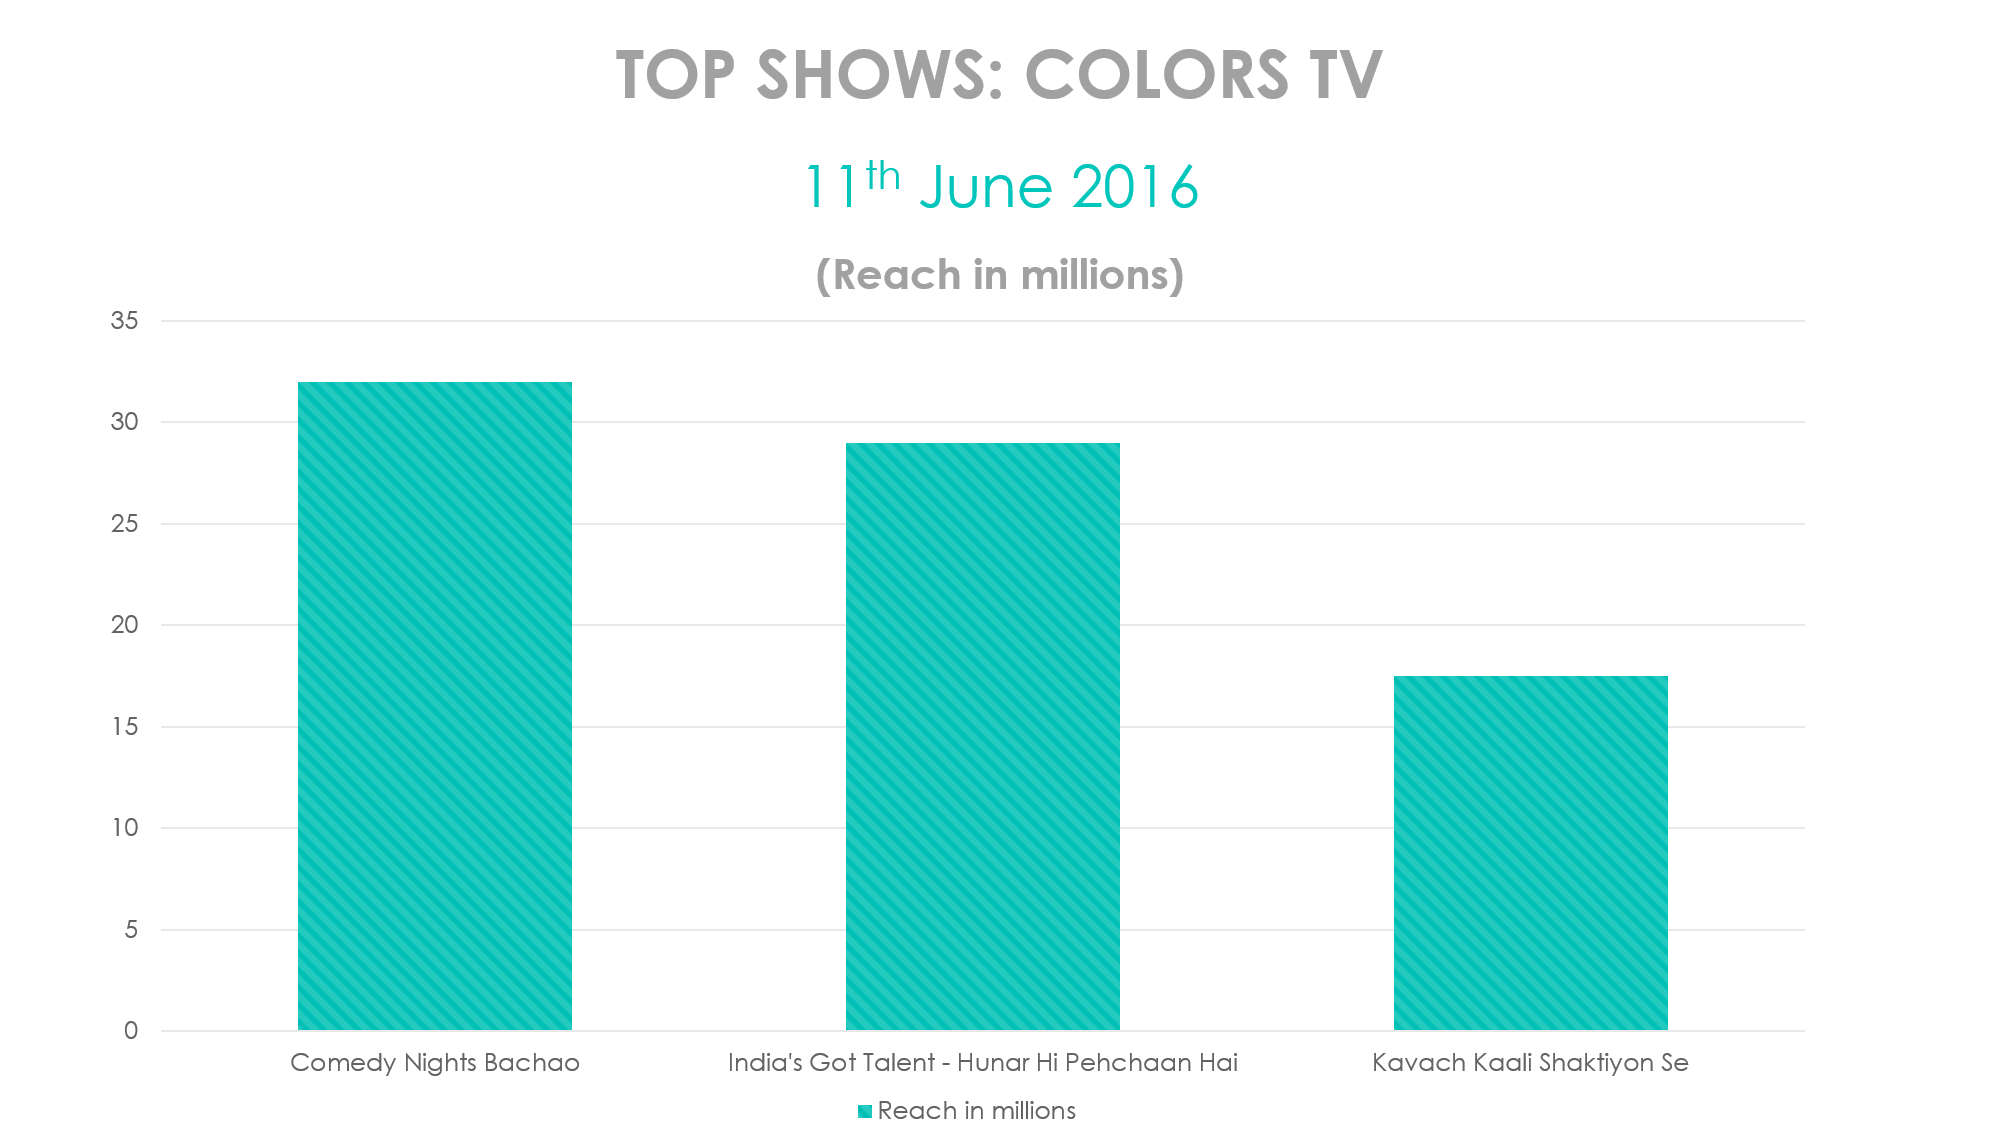 topshows-june11th-colorstv-16062016.png